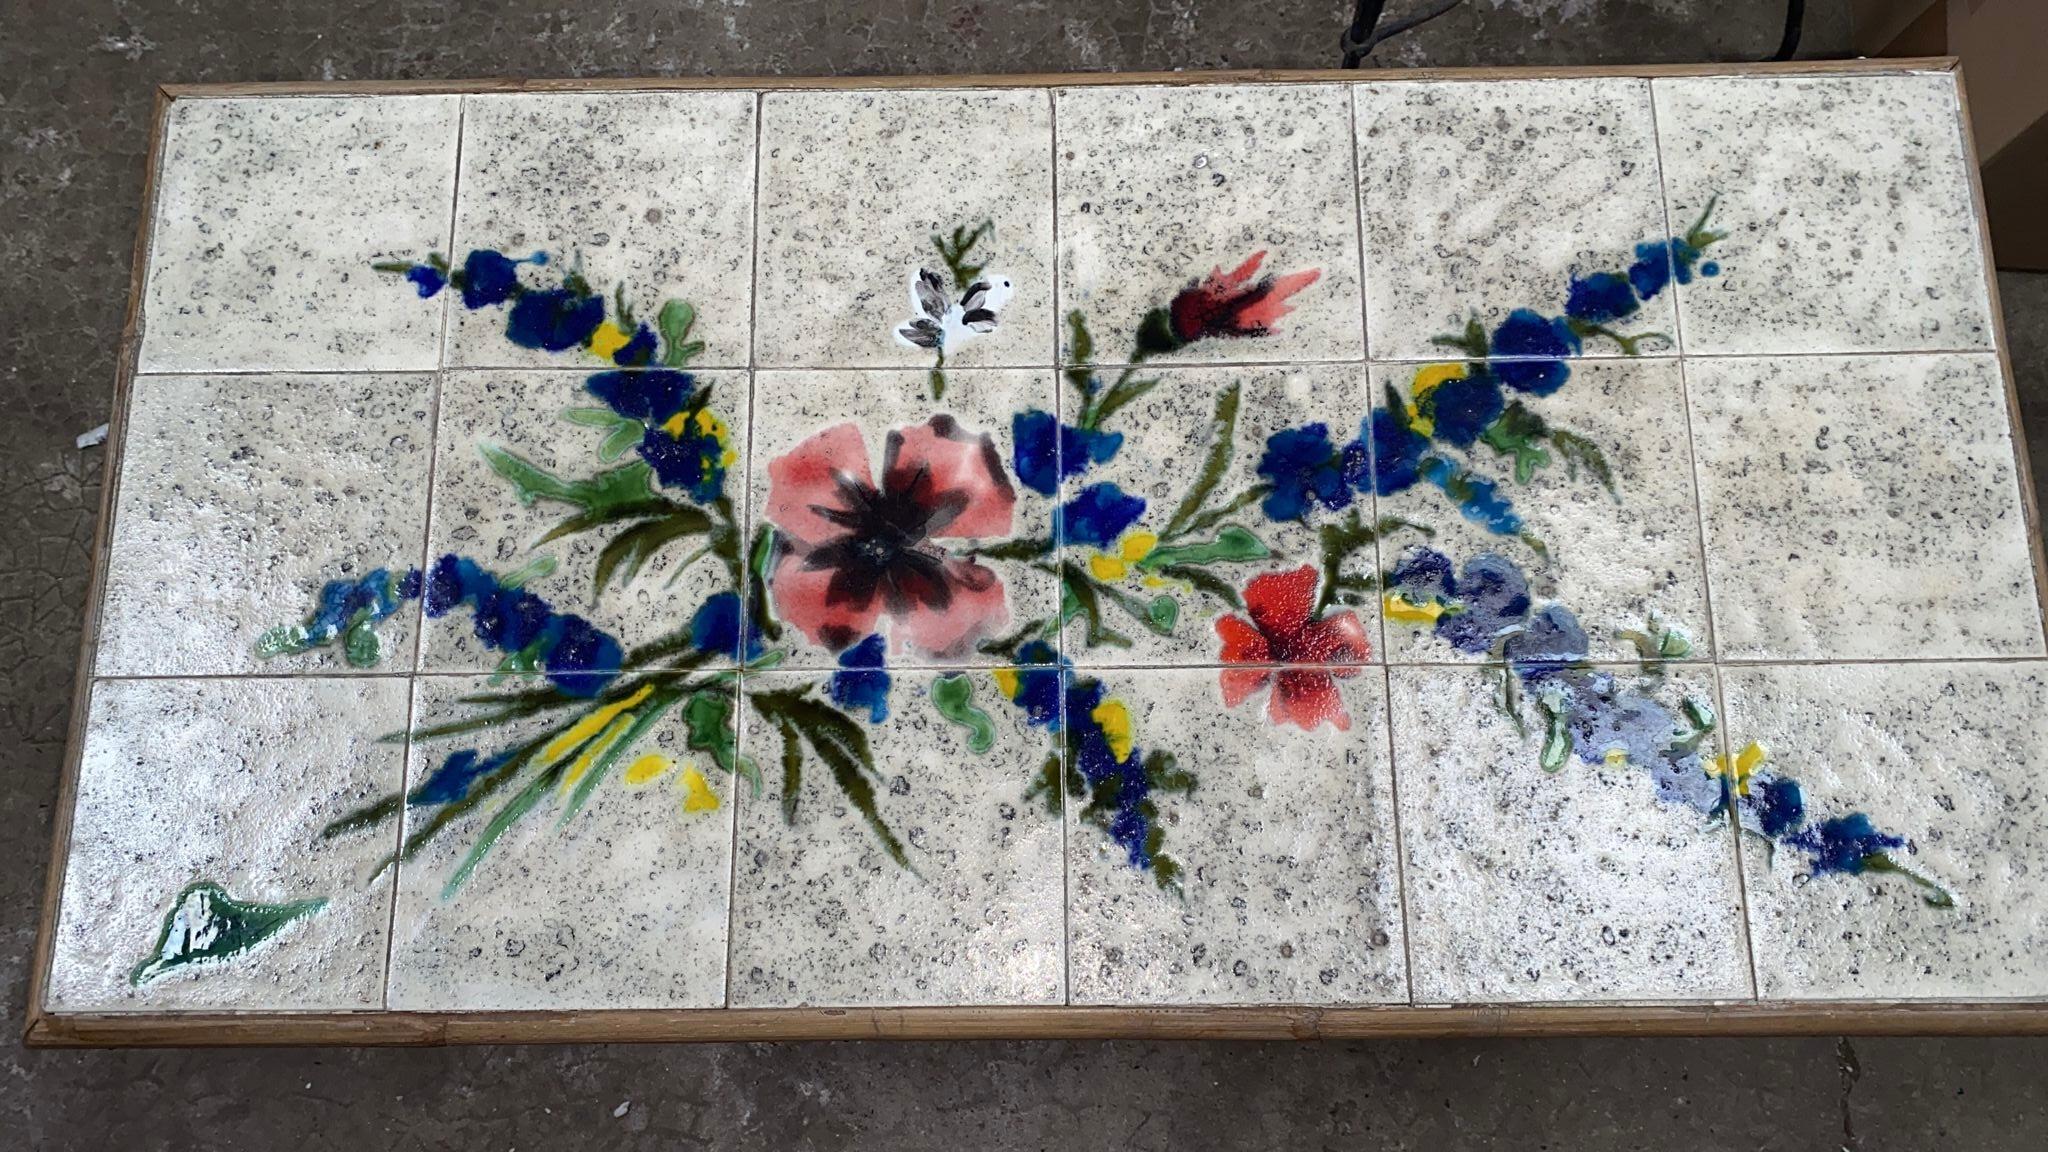 Rare Mid-Century Rattan & Ceramic Tiles Coffee Table Audoux Minet, Circa 1960.
Painting of wild flowers signed.
Height / 19 inches.
Size / 37 inches by 20.5 inches.

